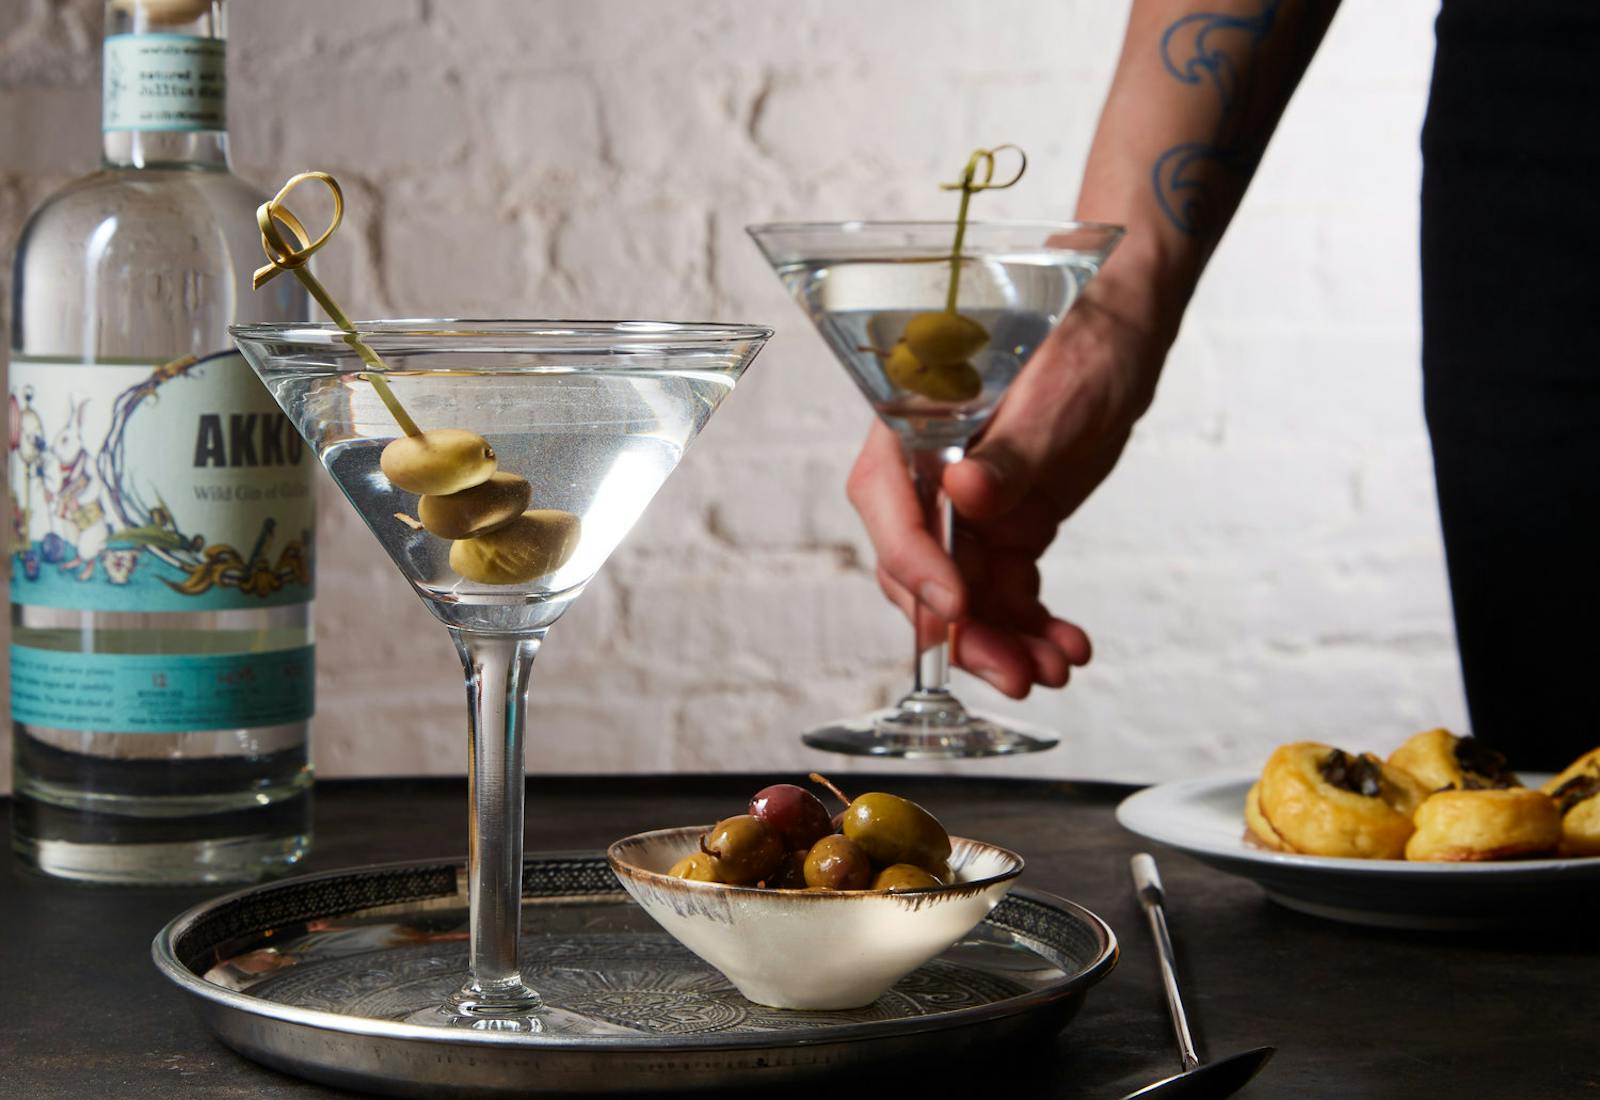 Chef serving dirty martinis alongside bowl of olives and bottle of Akko gin atop grey table